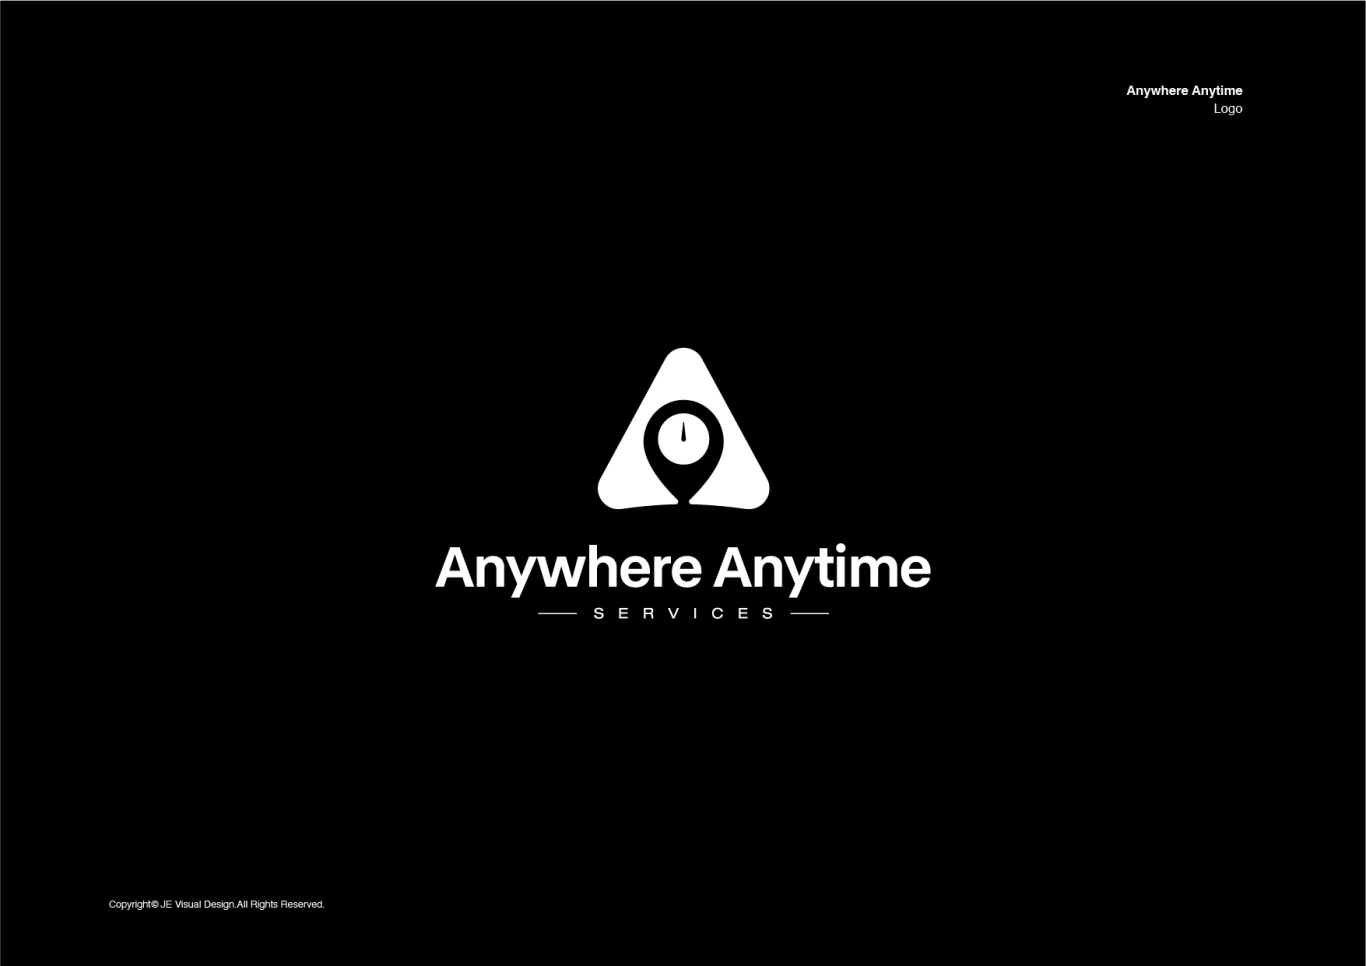 Anywhere Anytime logo设计图7